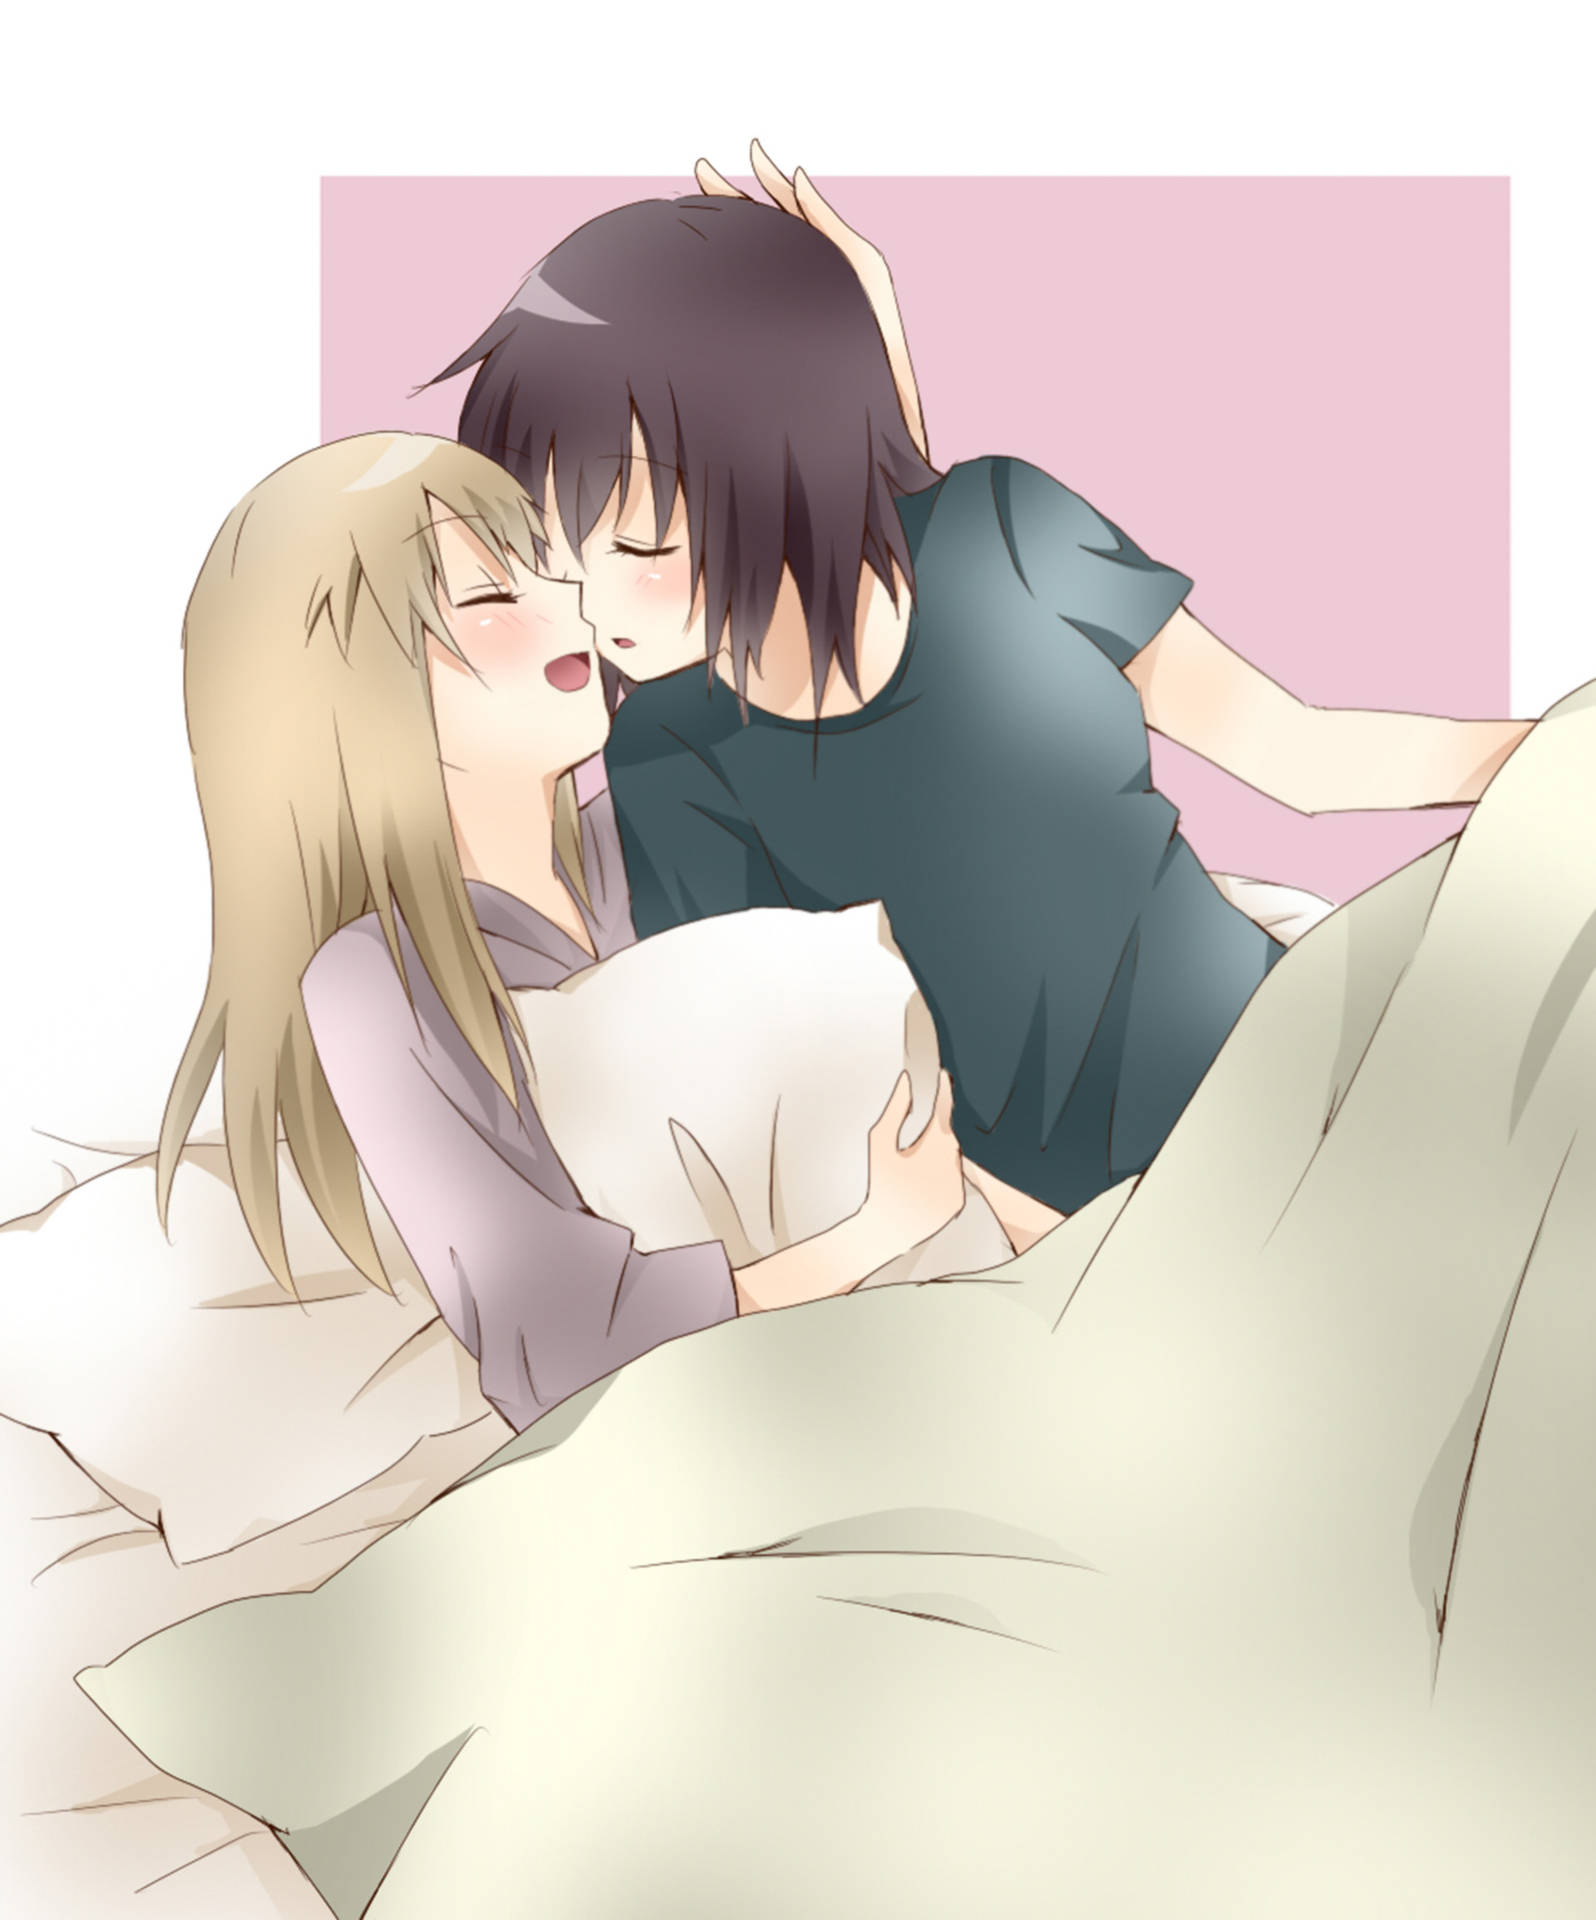 Cuddling Anime Lesbian Picture